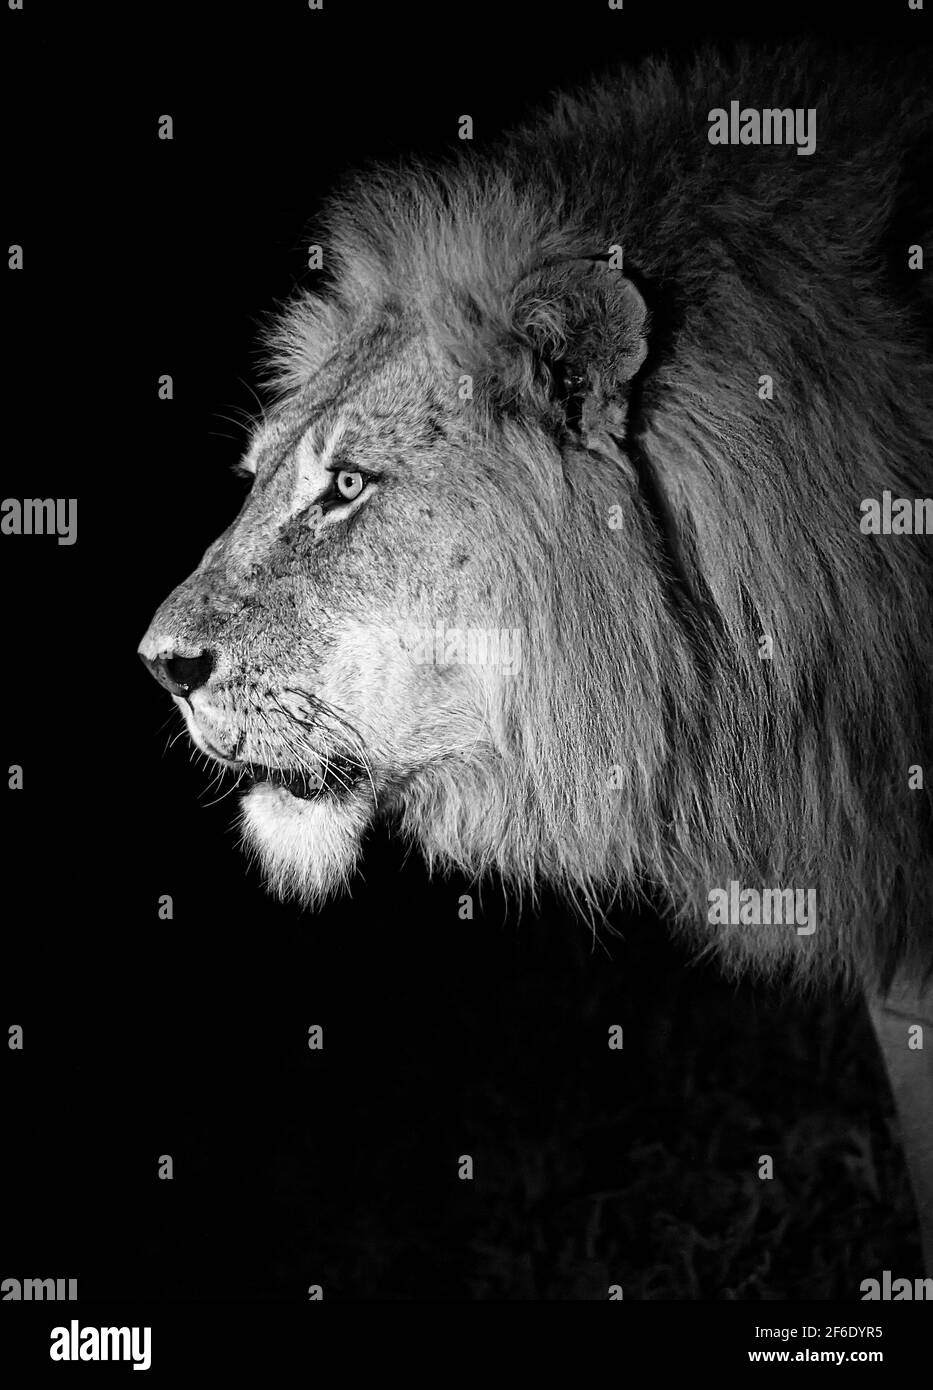 Black and White - Male Lion Stock Photo